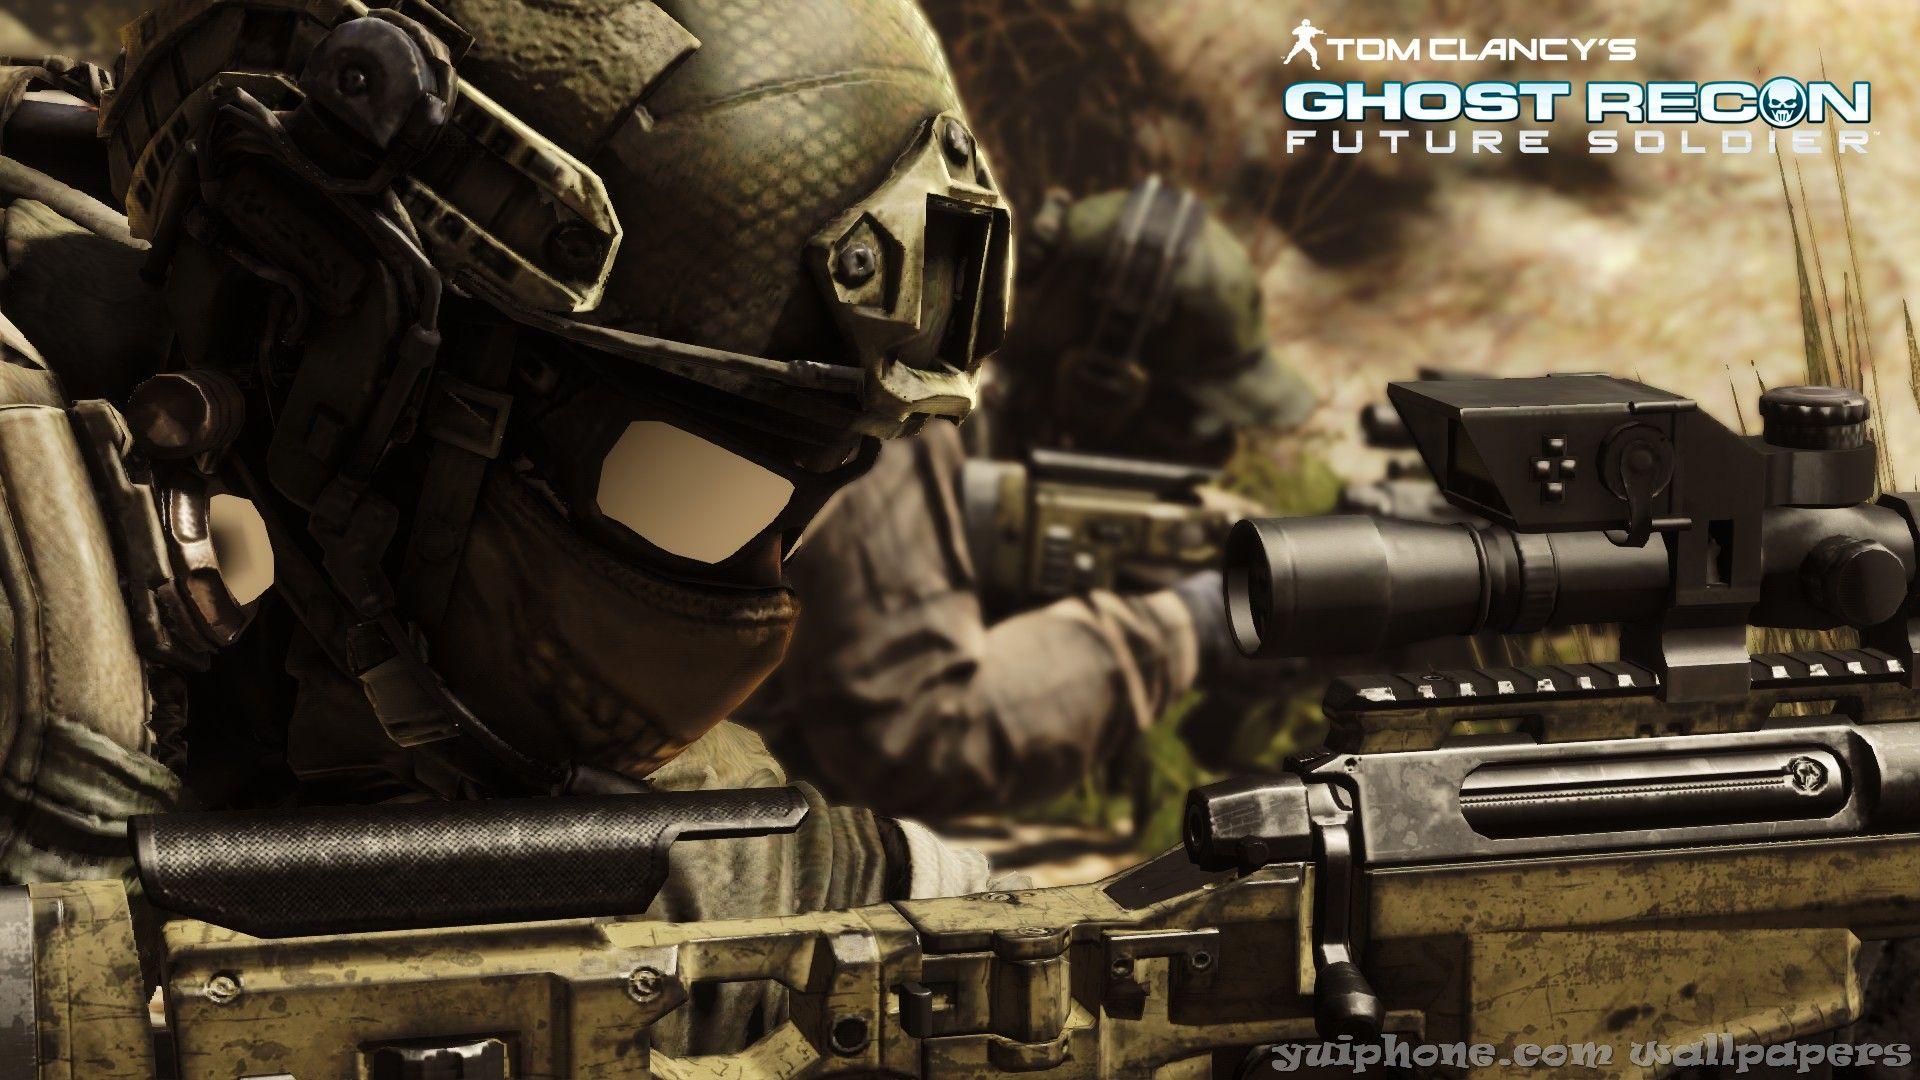 Gallery For: Ghost Recon Future Soldier Wallpaper, Ghost Recon